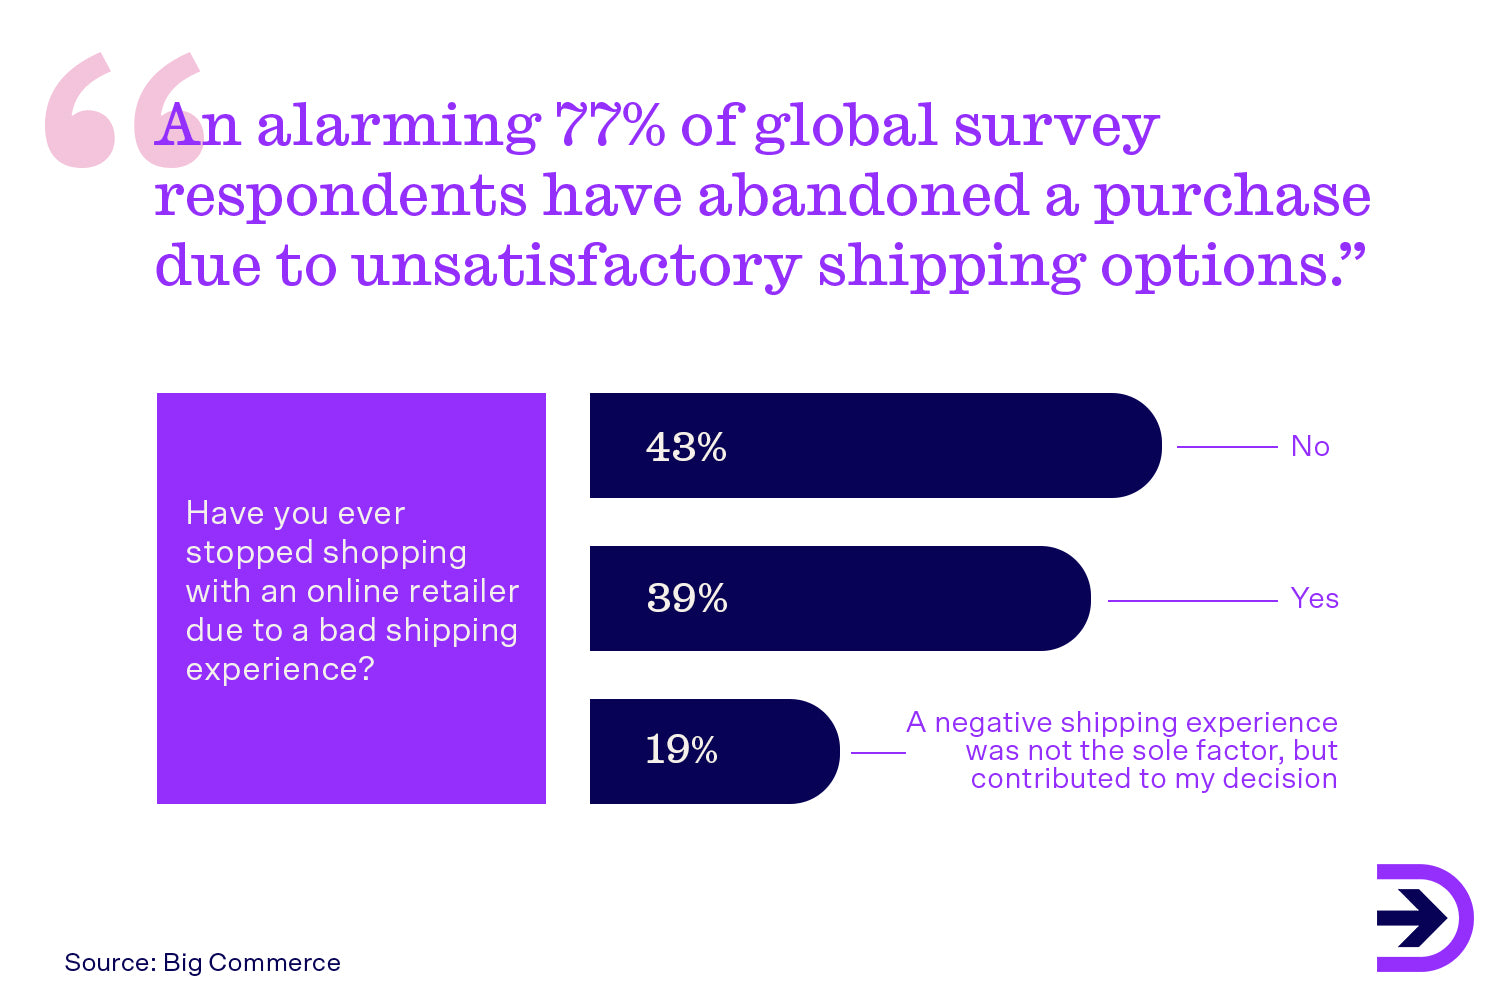 Unsatisfactory shipping conditions can be a very large deterrent for online shoppers.